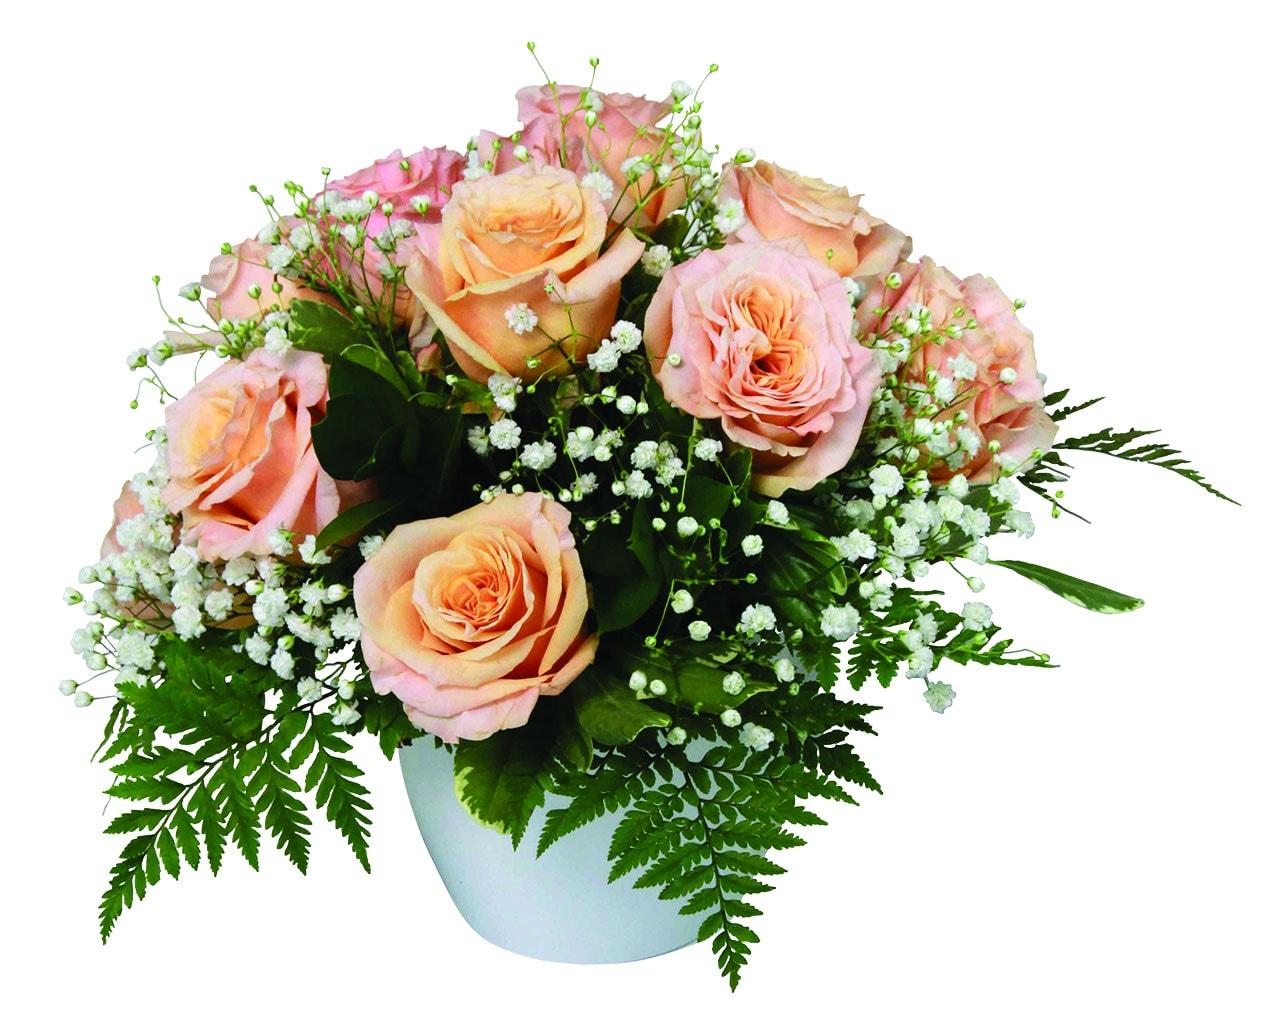 A fresh arrangement with pink roses, baby's breath and greens.